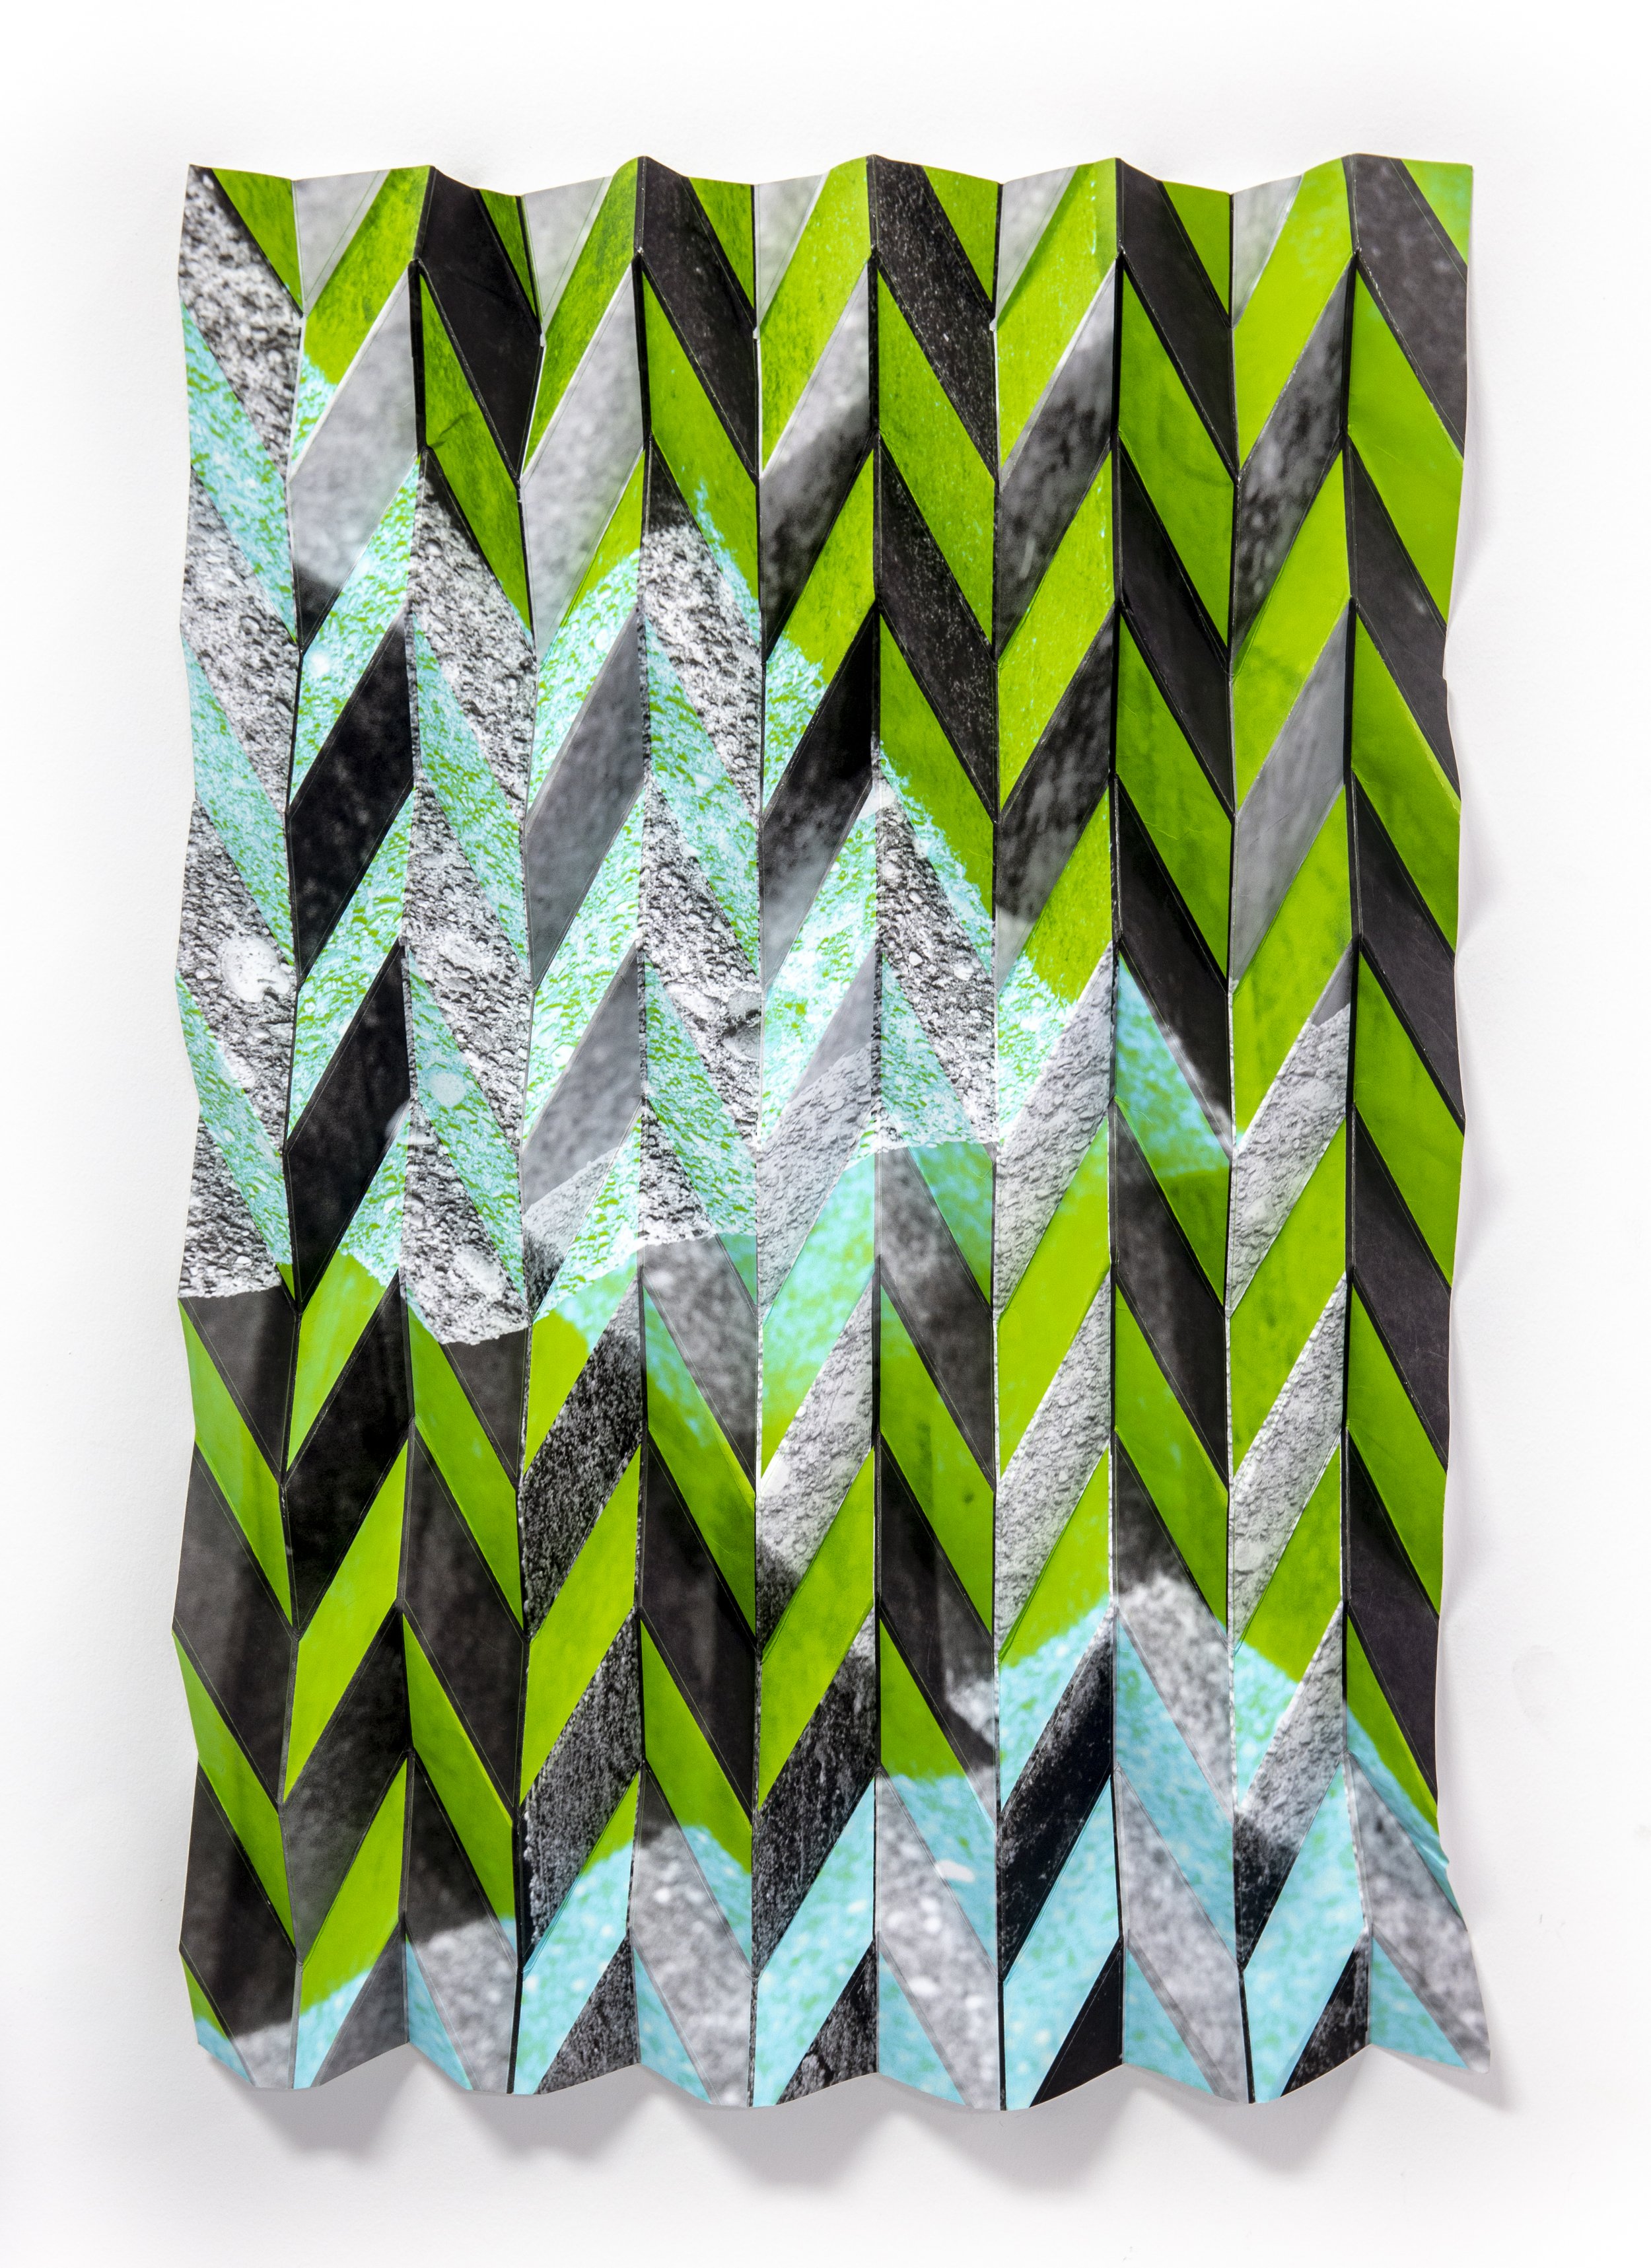   Tessellations (Miura 02 Green)   2019  folded archival pigment print edition of 5  26 x 22 inches 